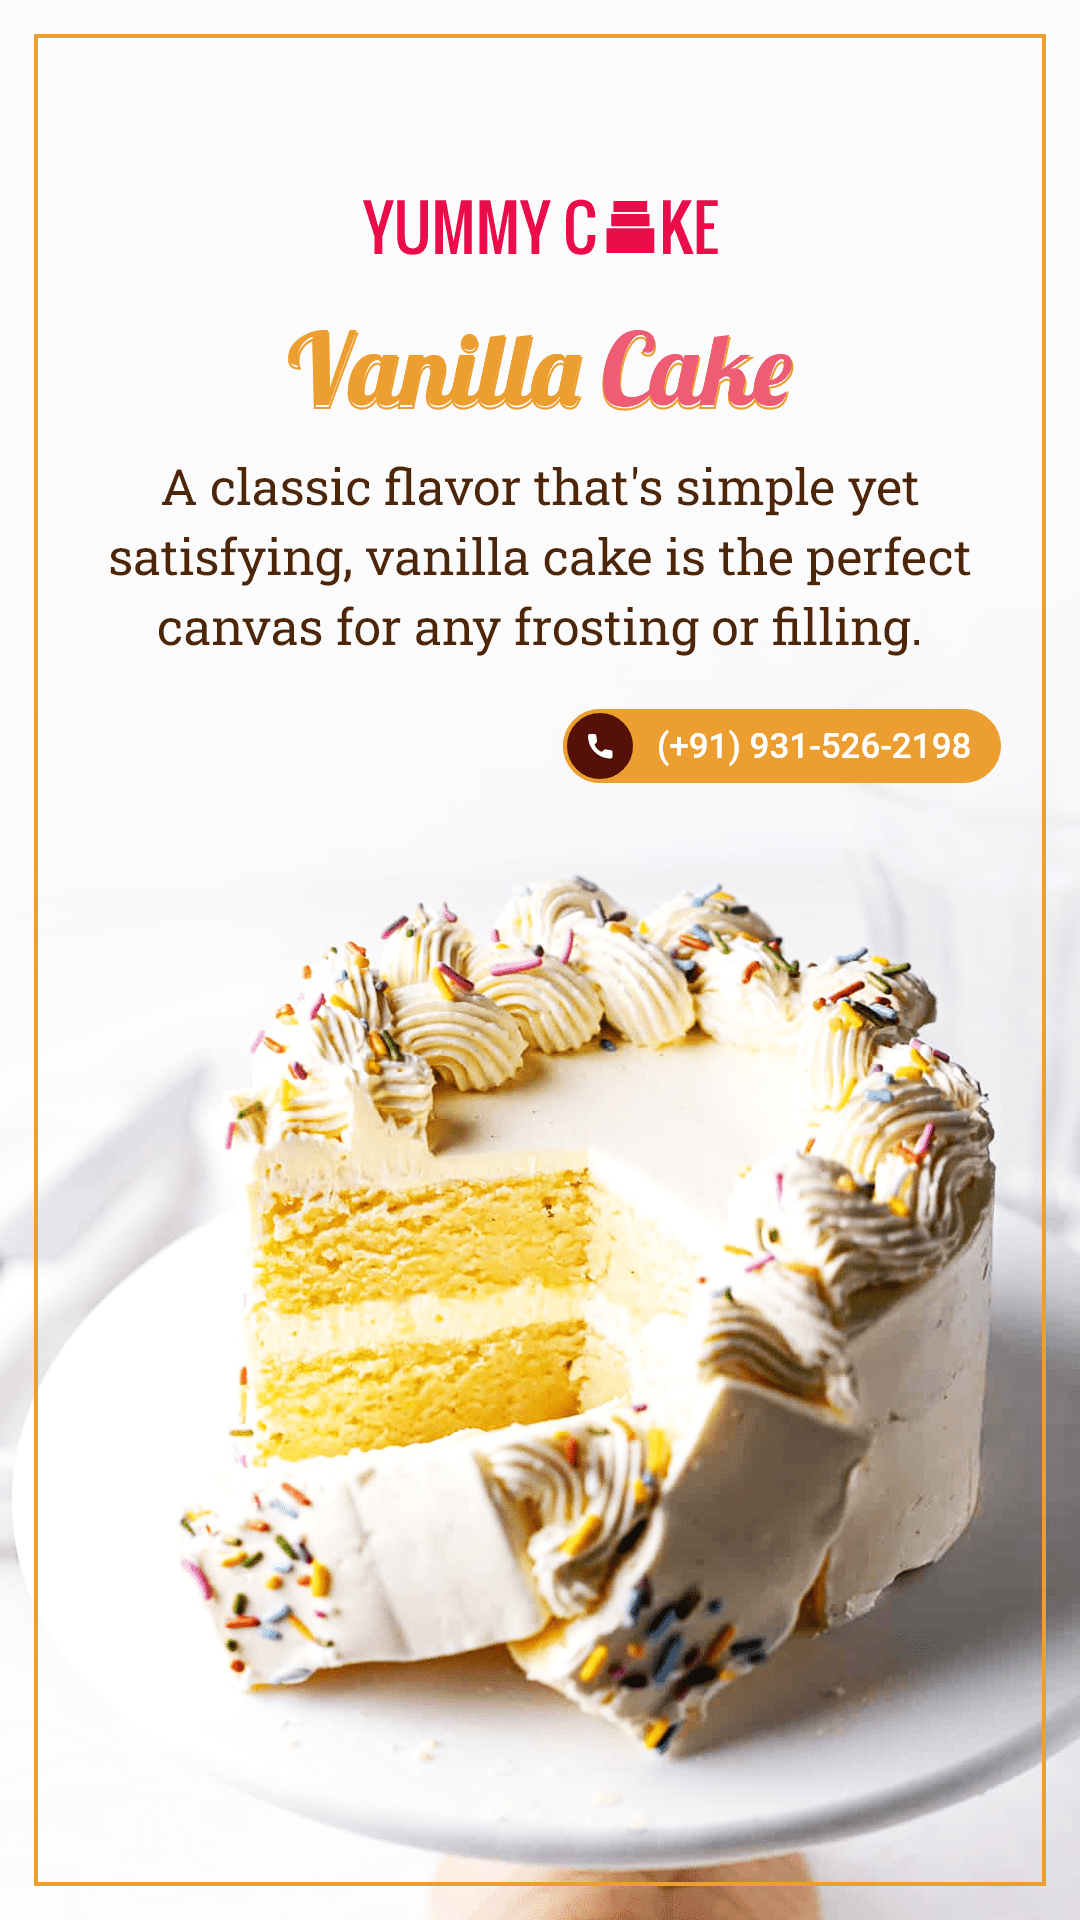 ♥️ SERVE 247 FOR EXCELLENCE IN BAKING ♥️ PINEAPPLE FLAVOUR CAKE ❤️ IT'S  FRESH , TASTY , HEALTHY .. ❤️DM FOR ORDERS ❤️ 12 AM MIDNIGHT… | Instagram